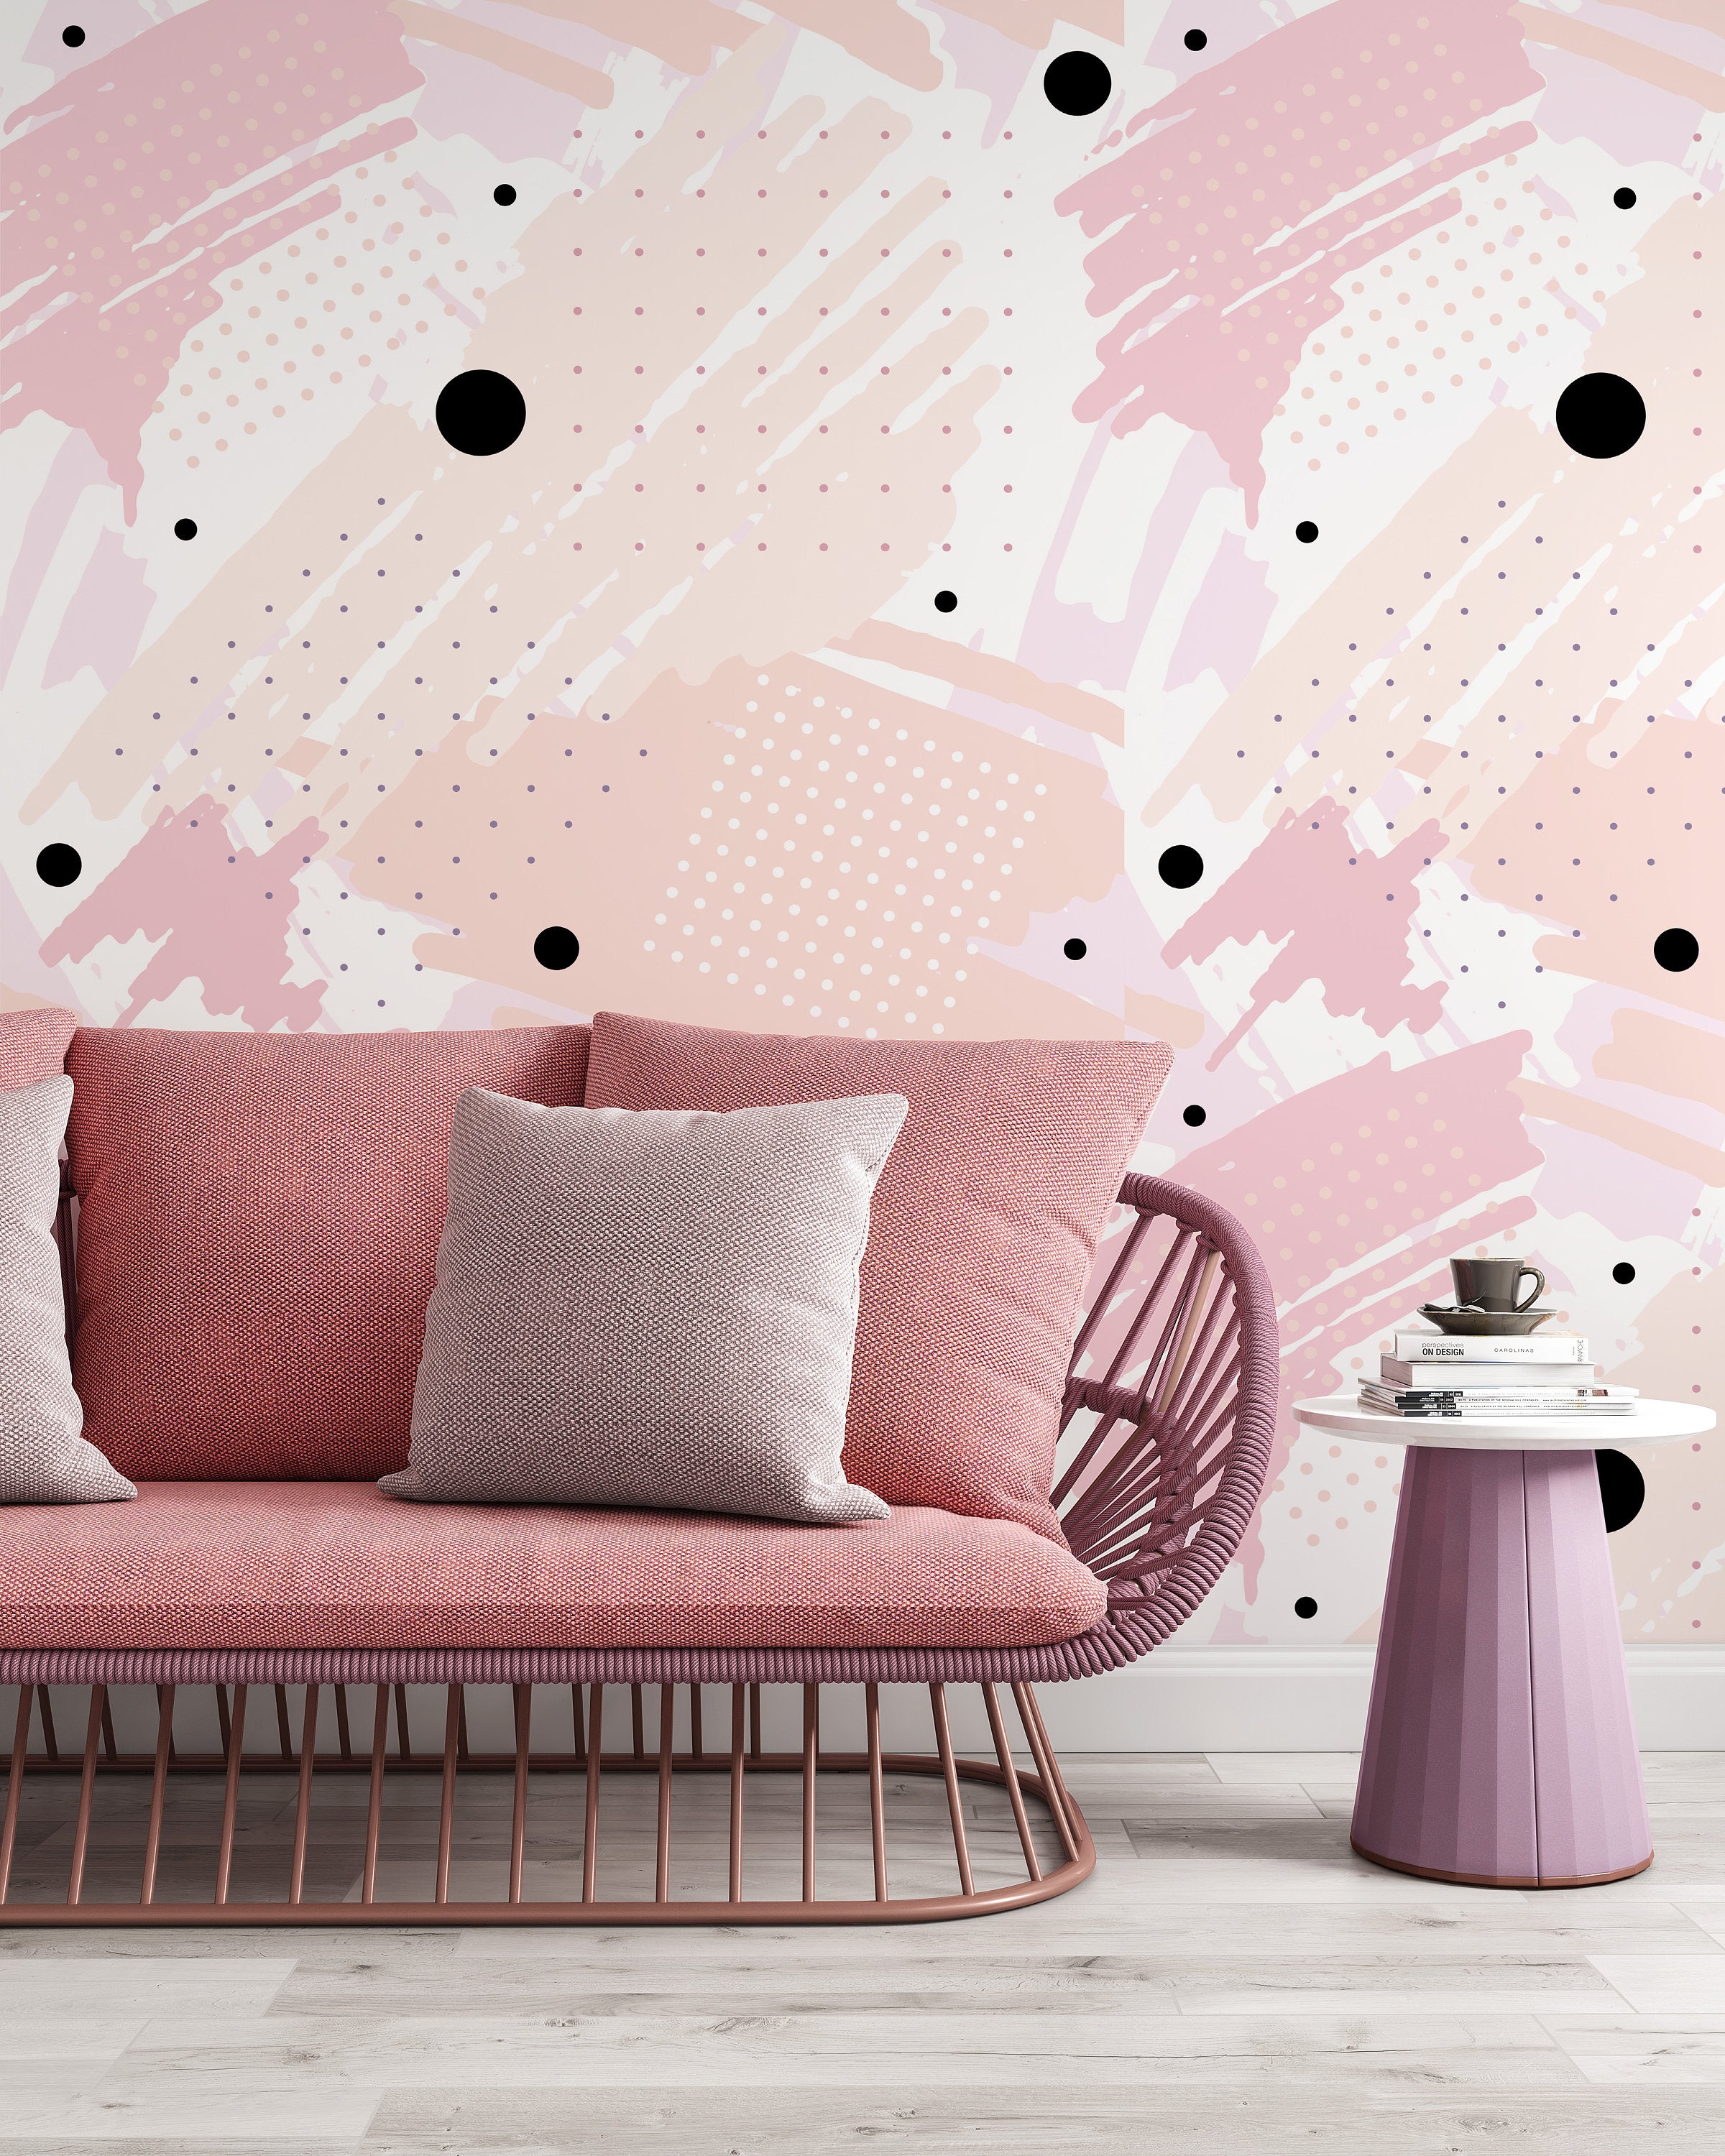 Abstract Background Brush Strokes Black Circles and Dots Wallpaper Self Adhesive Peel and Stick Wall Sticker House Design Removable